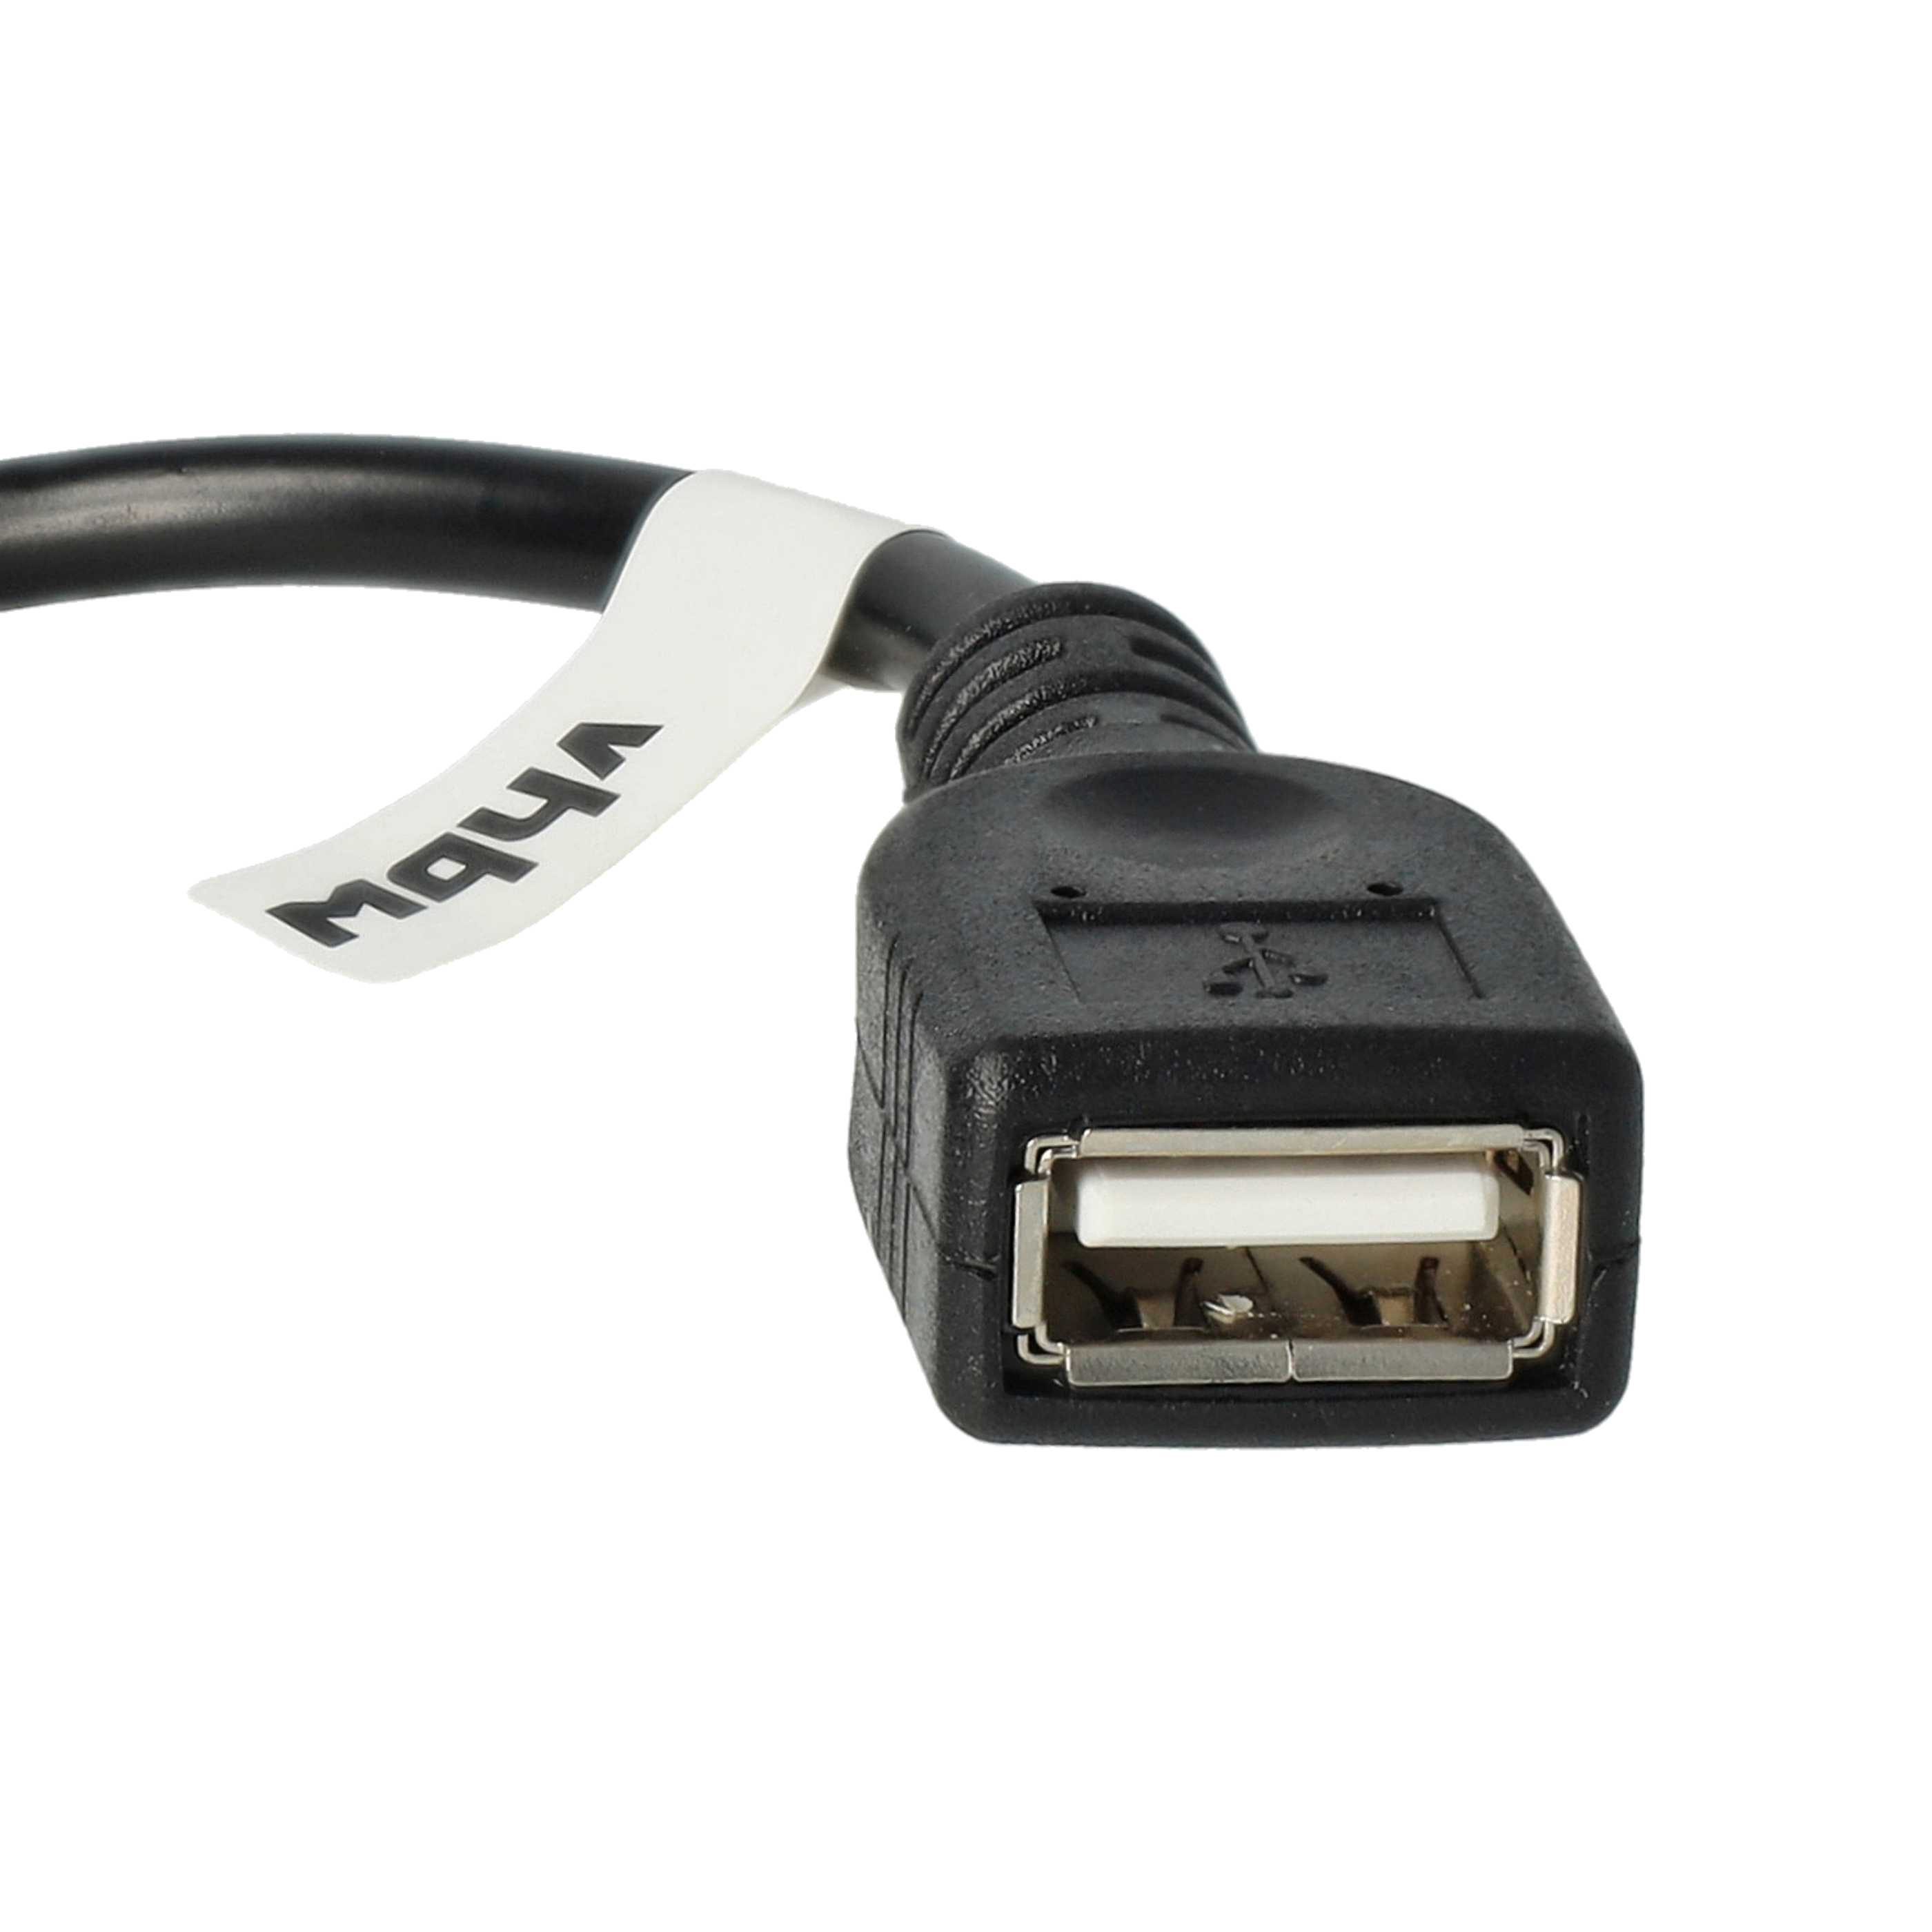 Adapter OTG Micro-USB to USB port (female) 90° angle for smartphone, tablet, netbook, laptop